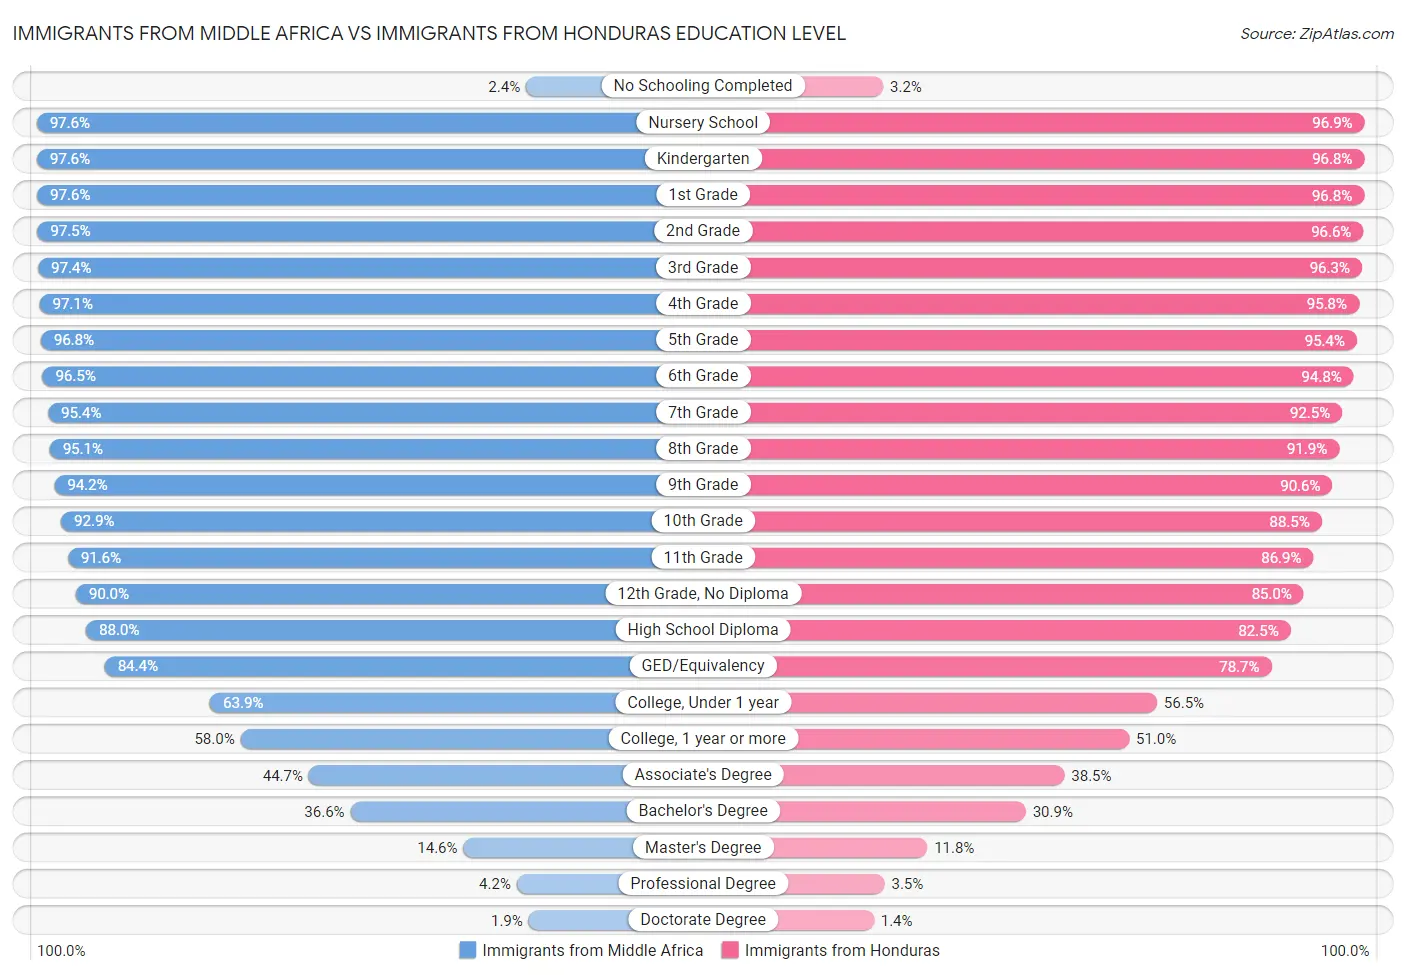 Immigrants from Middle Africa vs Immigrants from Honduras Education Level